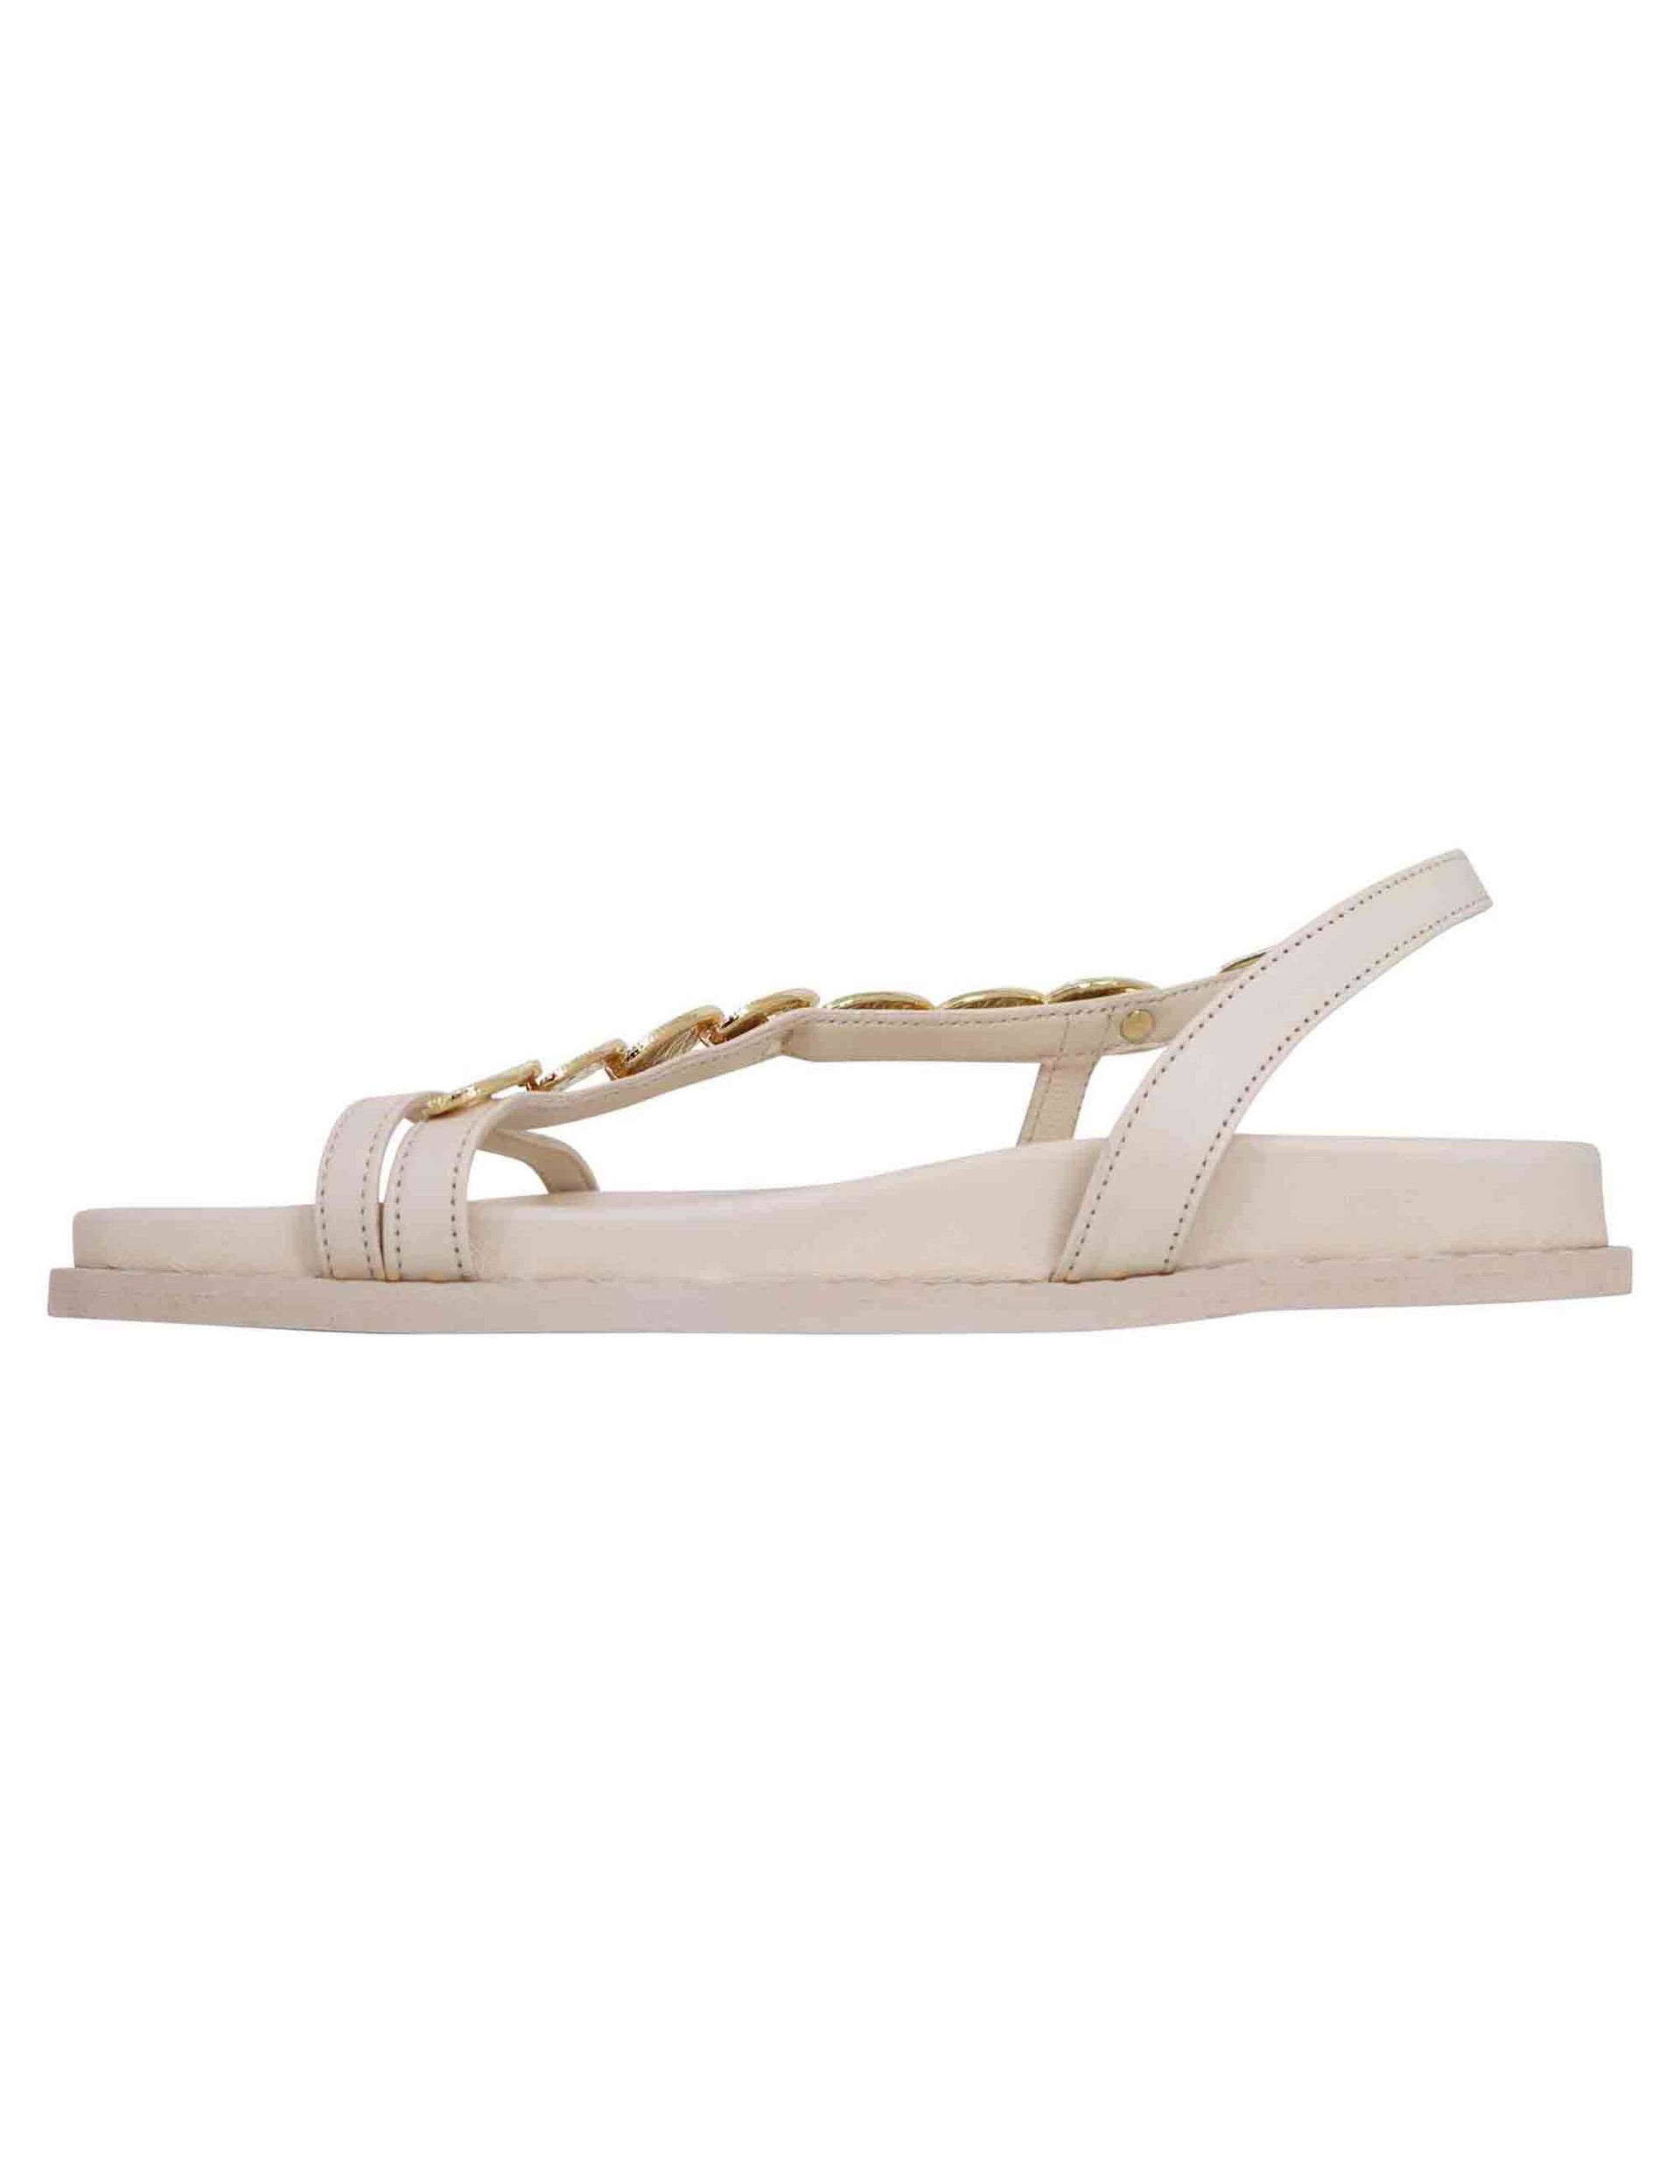 Women's slingback flip-flop sandals in off-white leather with gold leaves